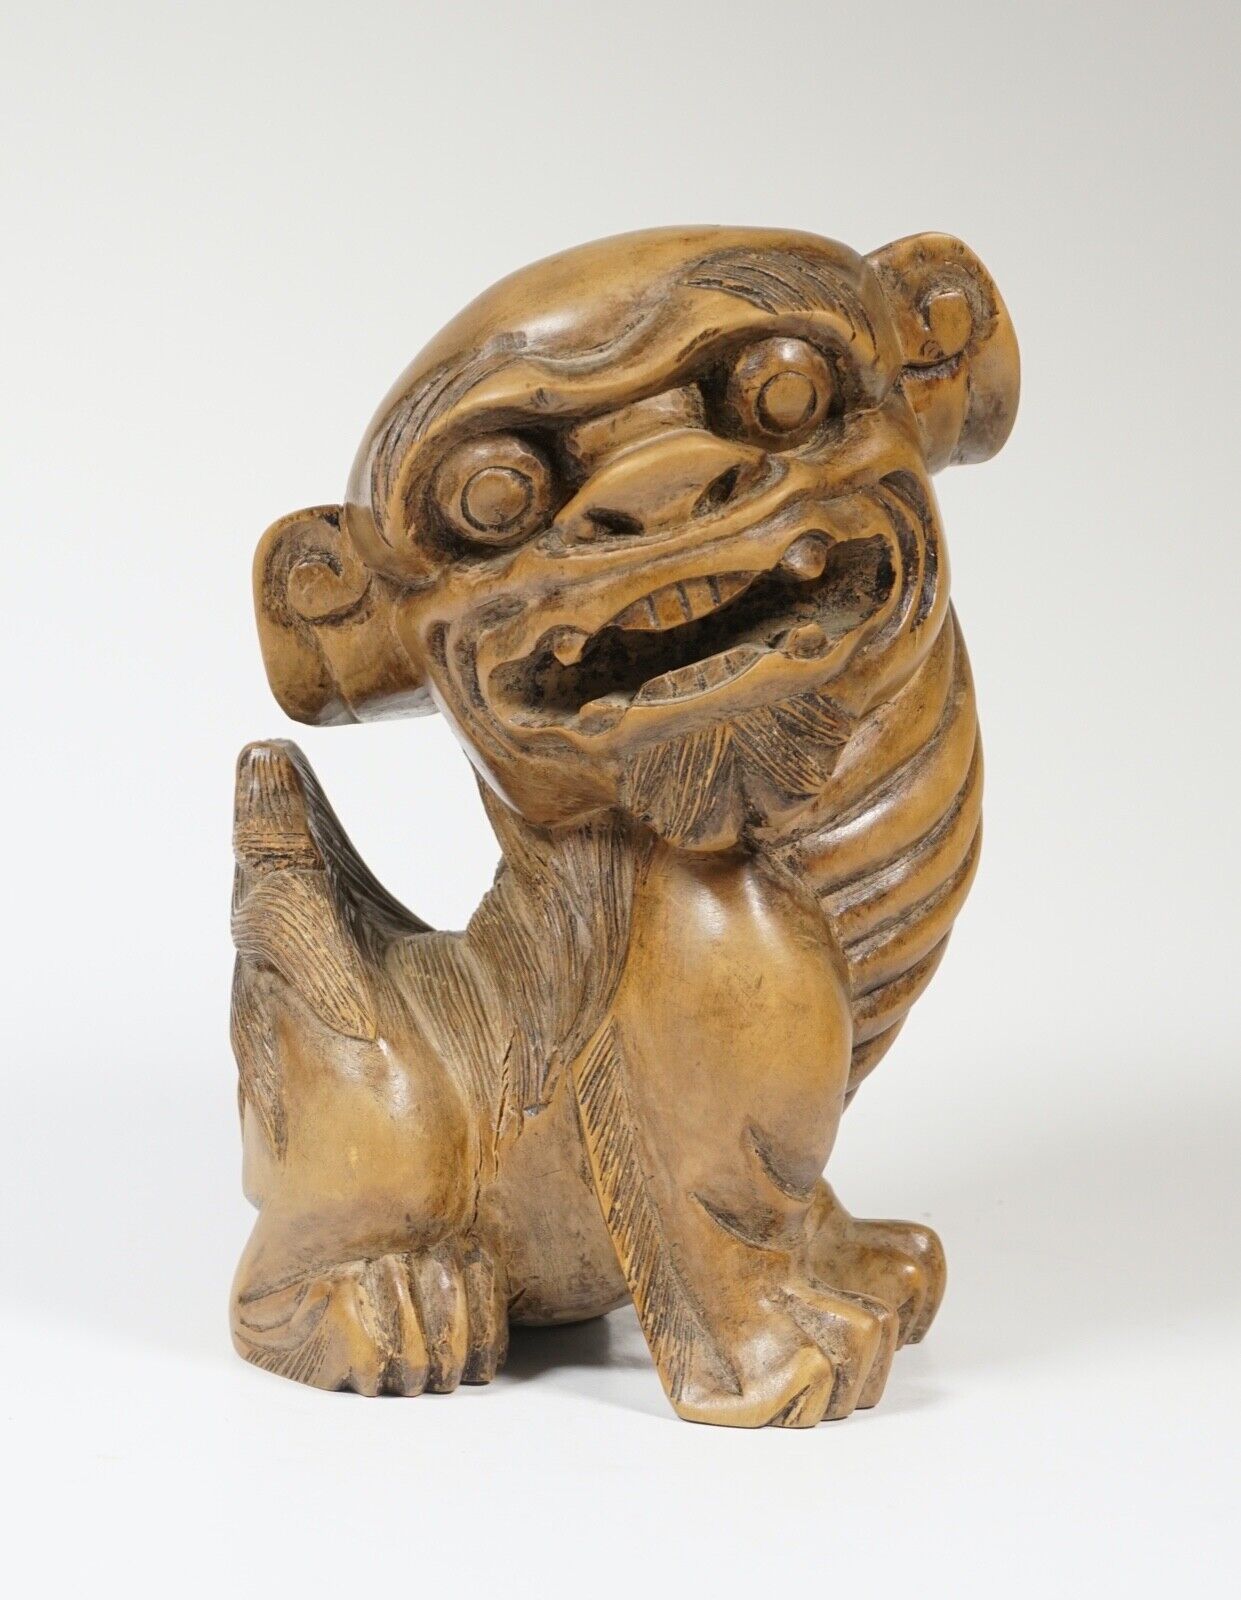 Japanese wooden shishi lion dog statue - hand carved marked by artist foo dog